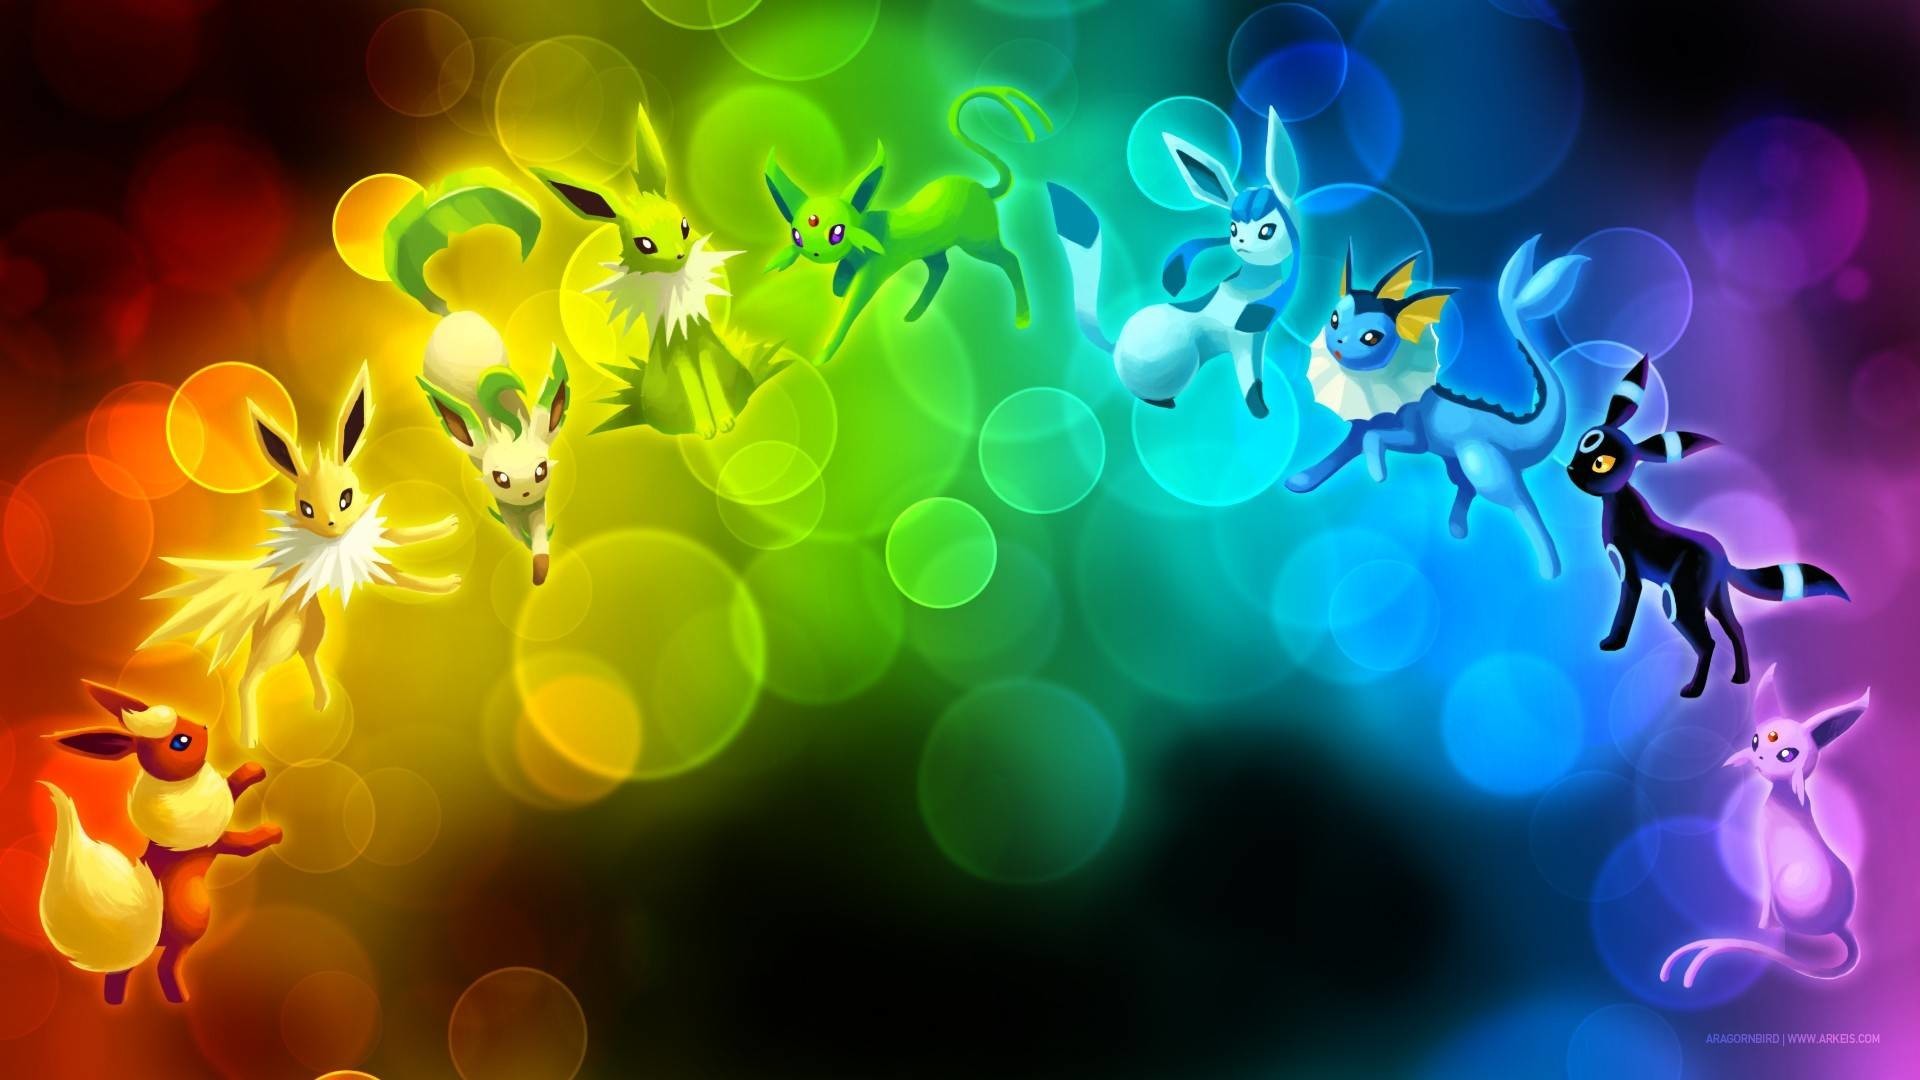 1920x1080  Pokemon Wallpapers Hd Collection For Free Download | HD Wallpapers  | Pinterest | Hd wallpaper, Wallpaper and Desktop backgrounds